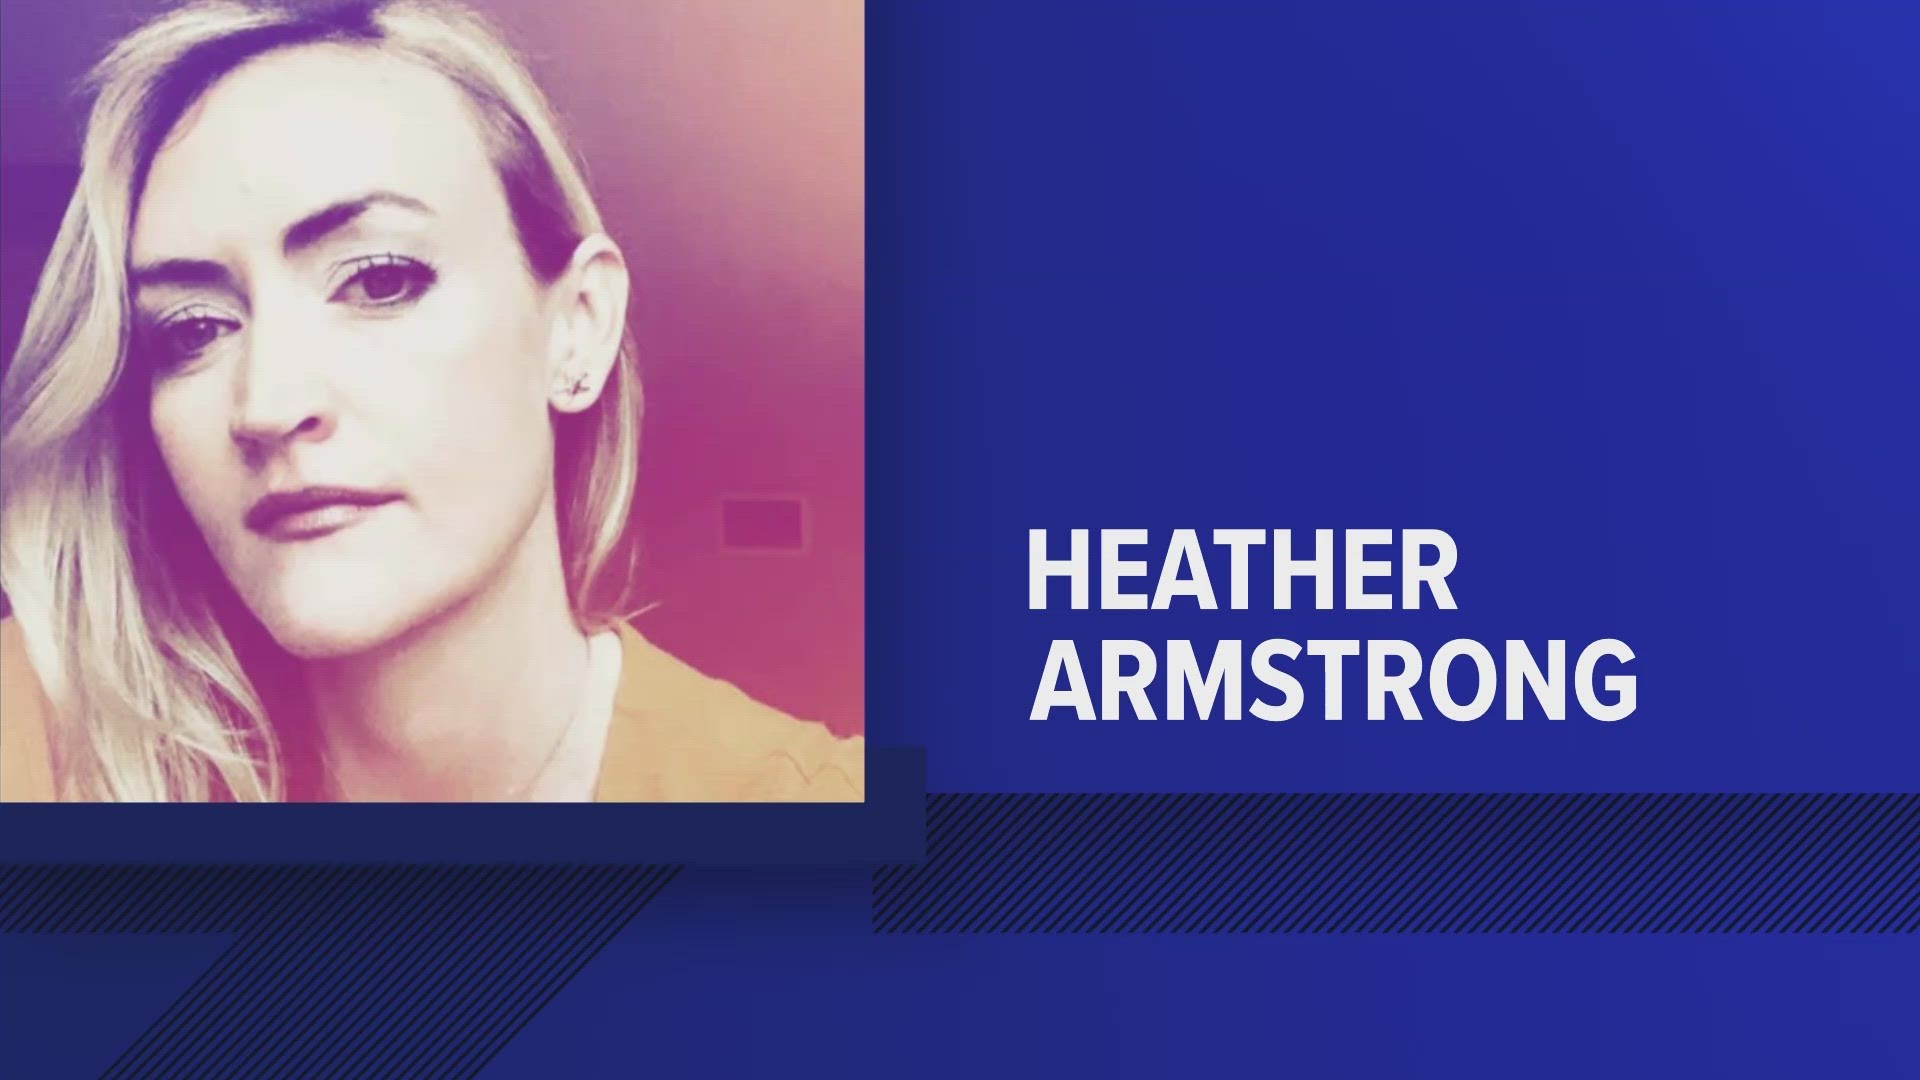 Pioneering mommy blogger and Bartlett High grad Heather Armstrong, known as Dooce to fans, has died at home in Salt Lake City.